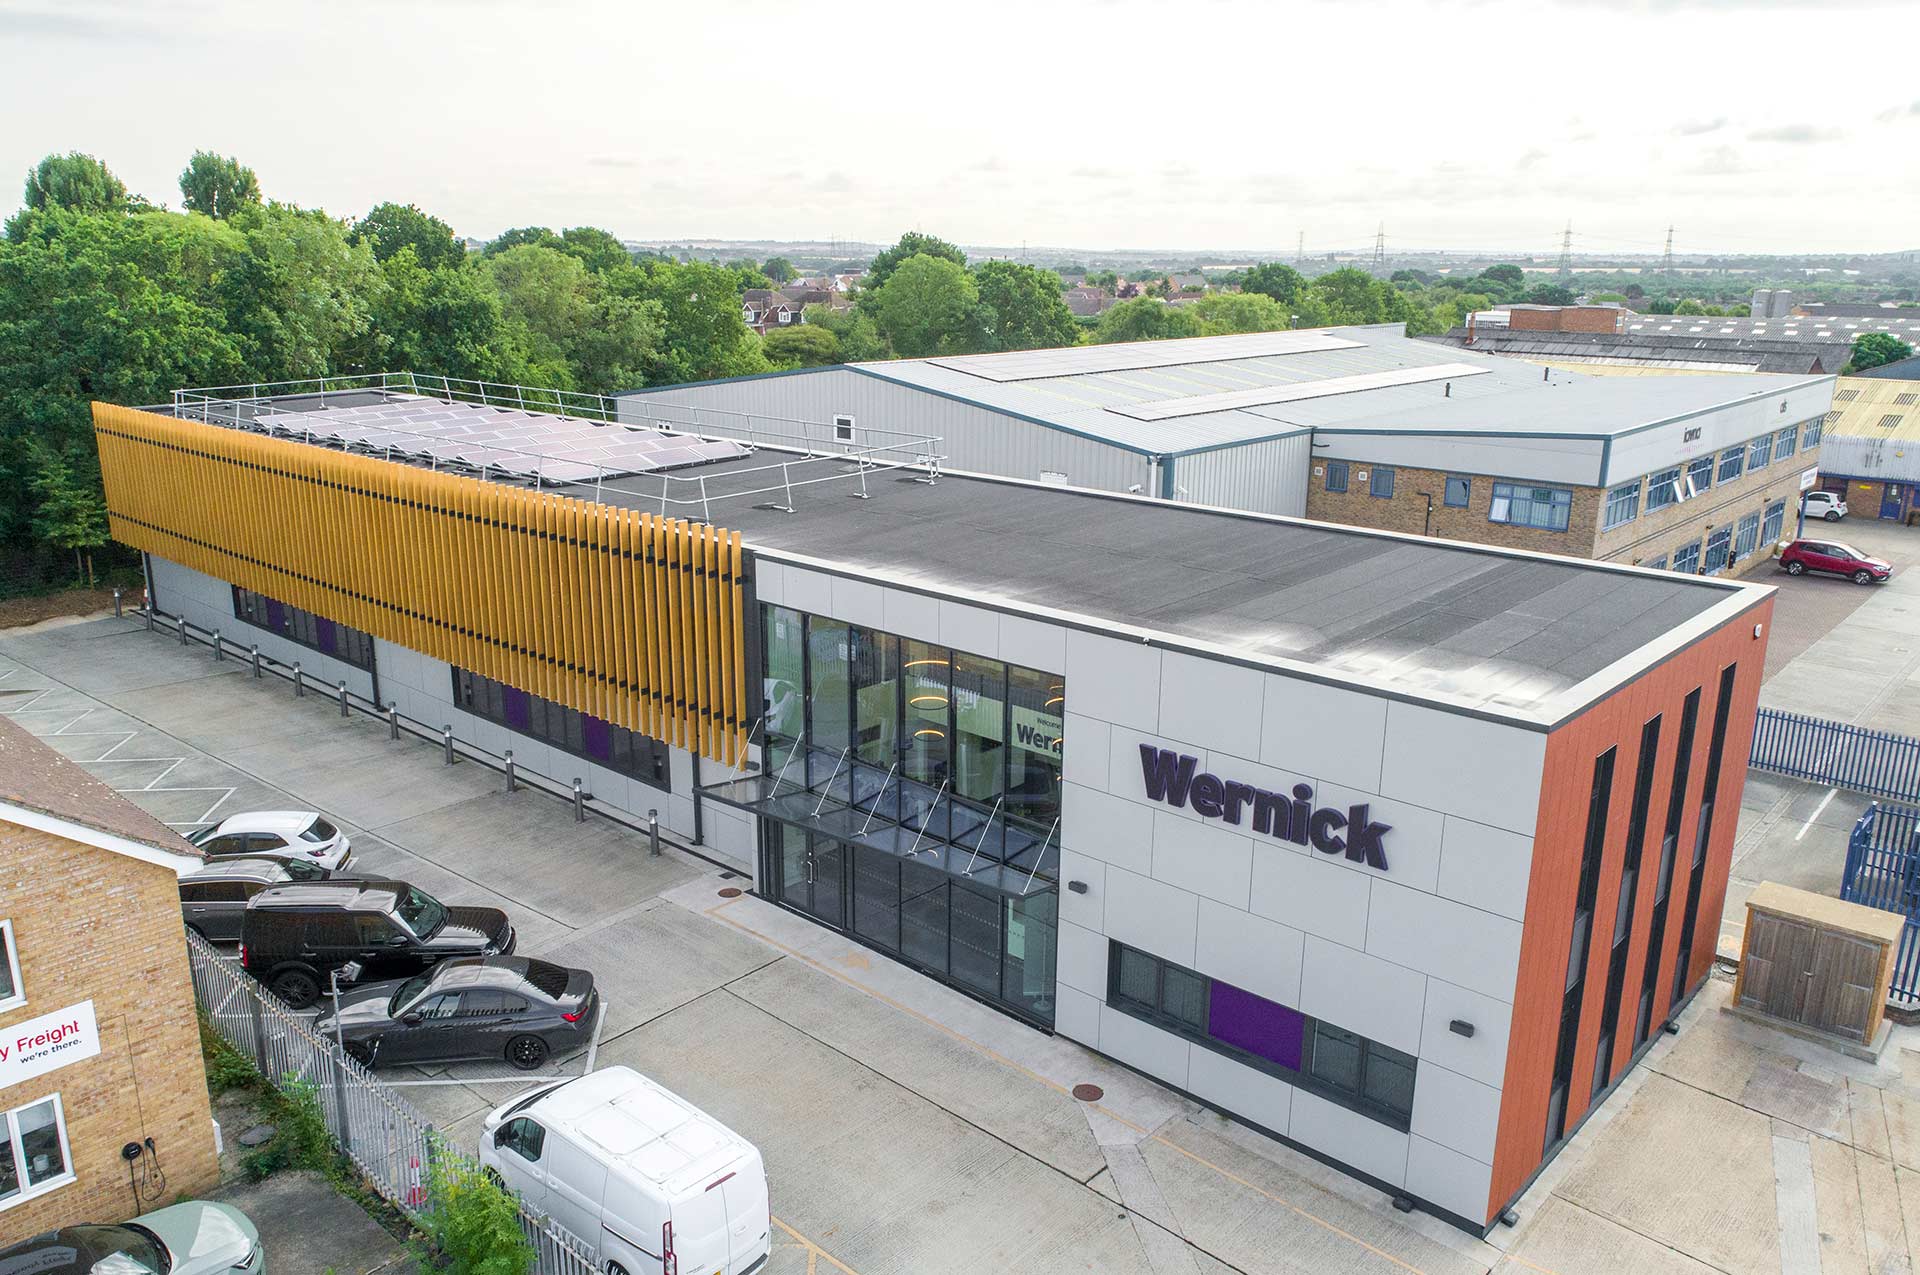 Image of Wernick's head office